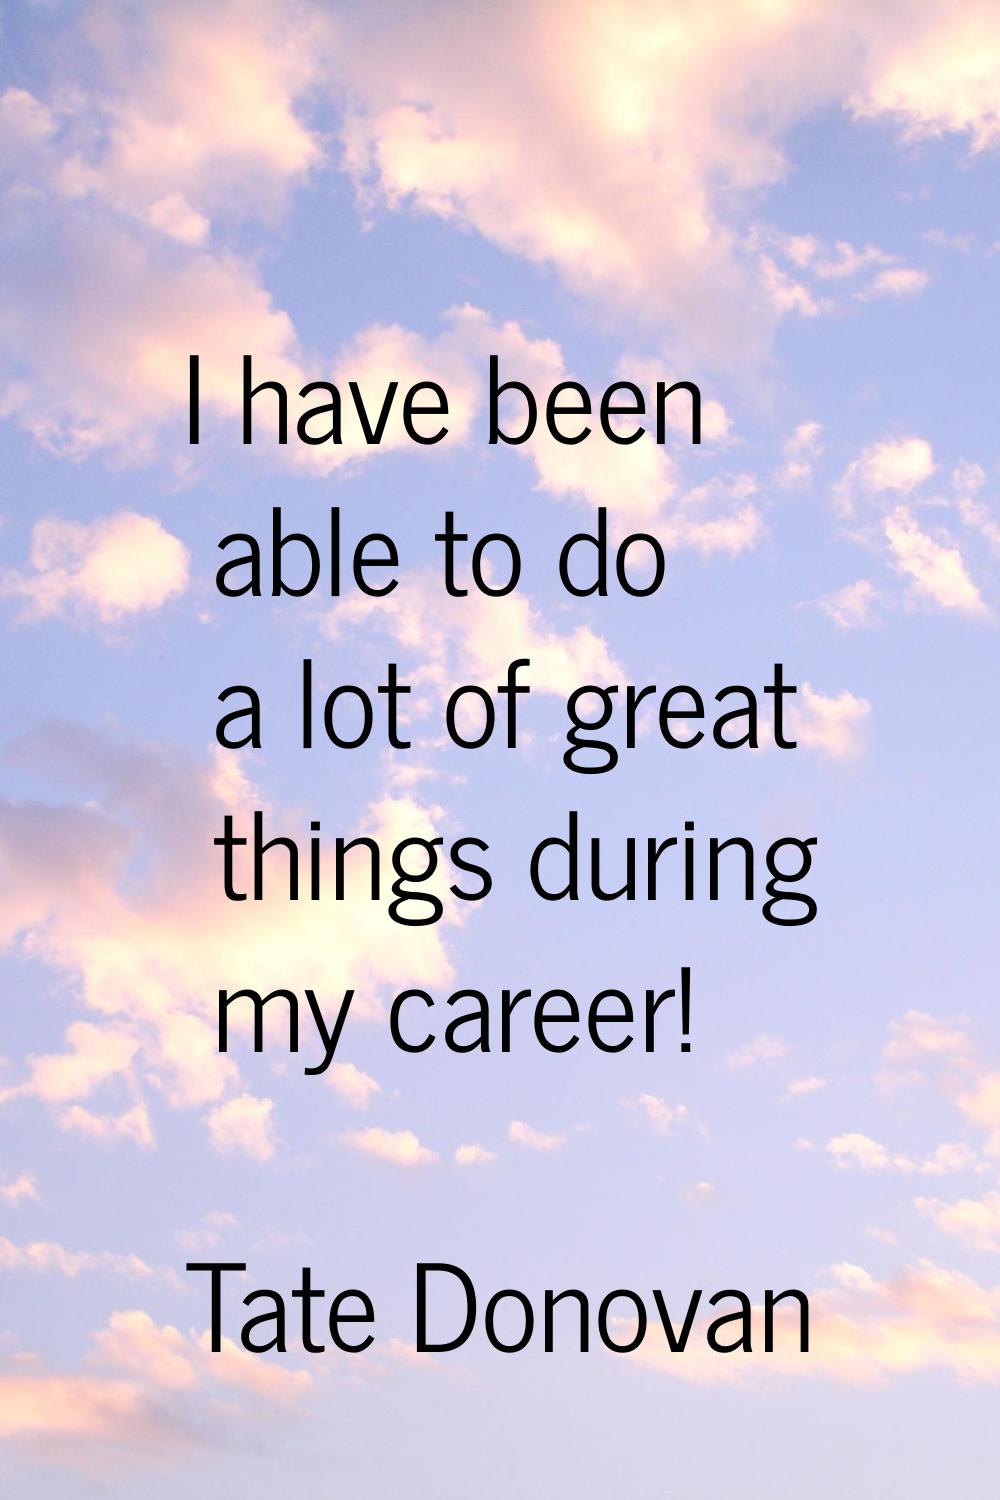 I have been able to do a lot of great things during my career!